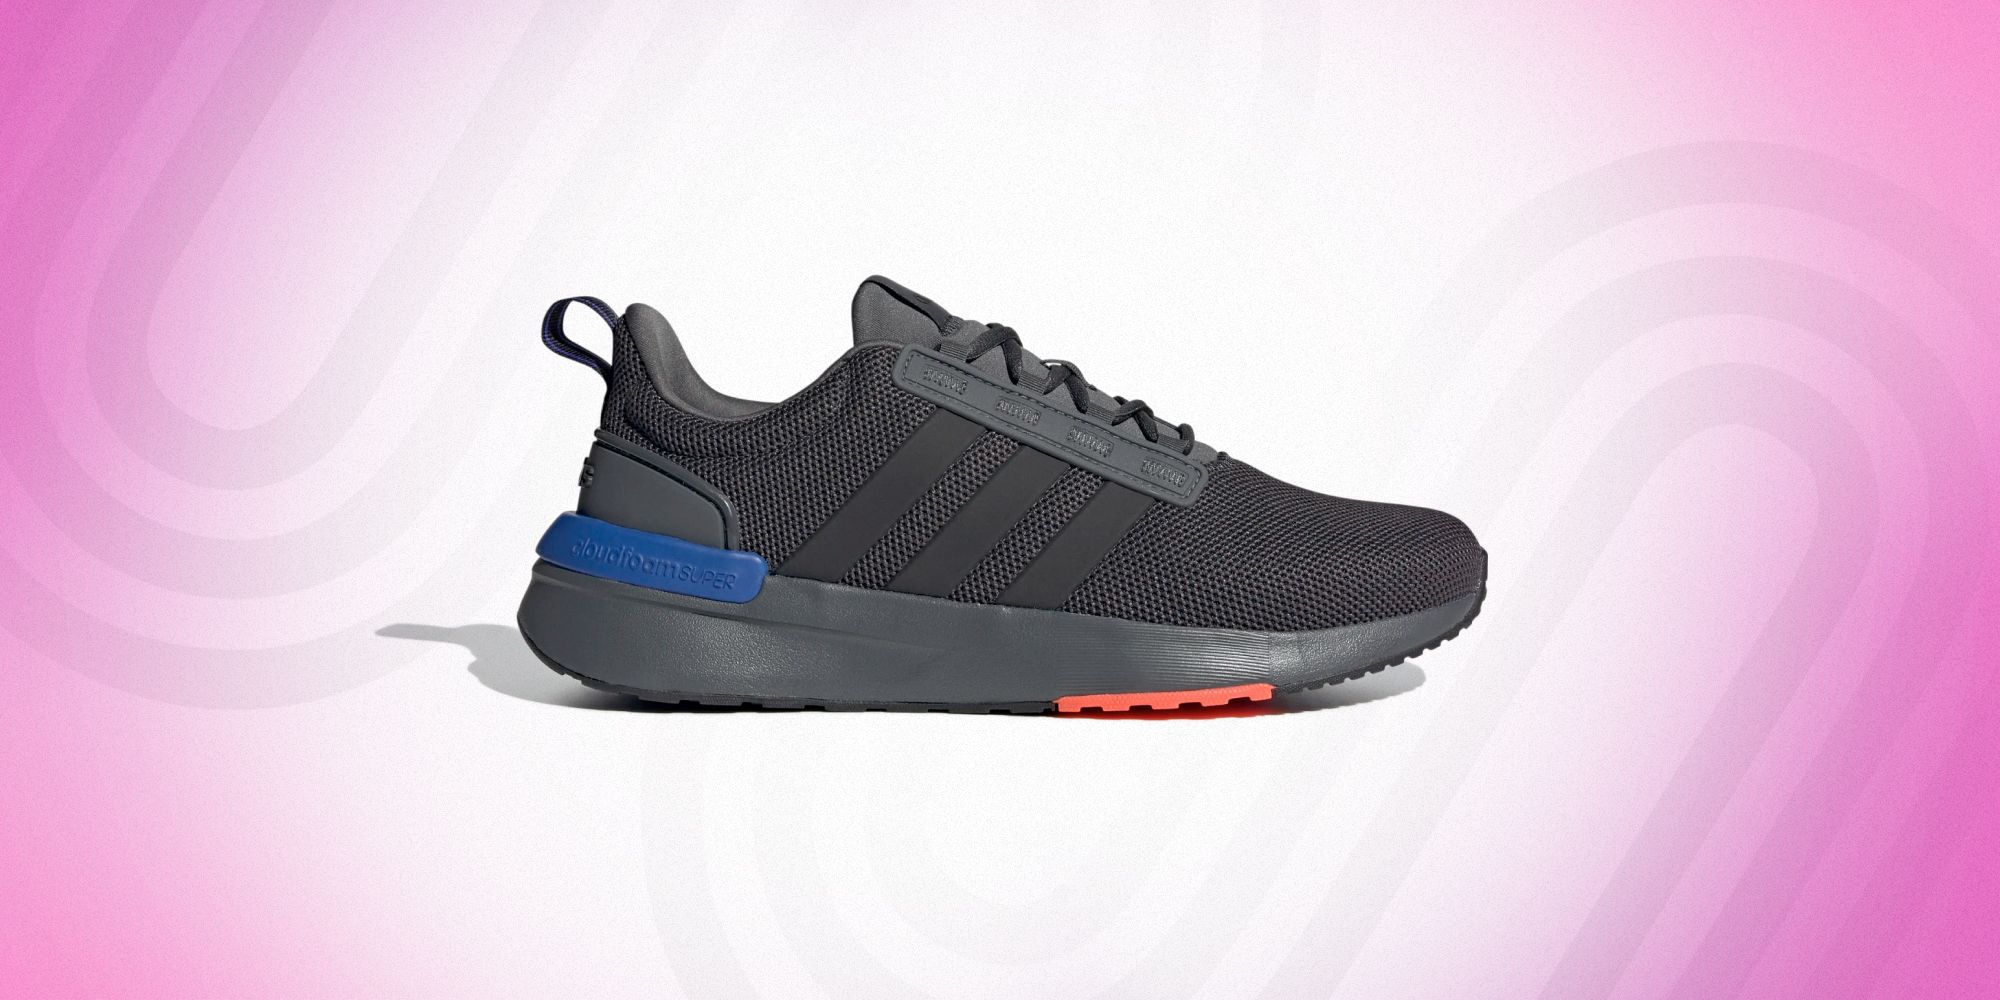 Ofre Sjældent meditativ Refresh Your Running Gear With This Surprise Adidas Sale